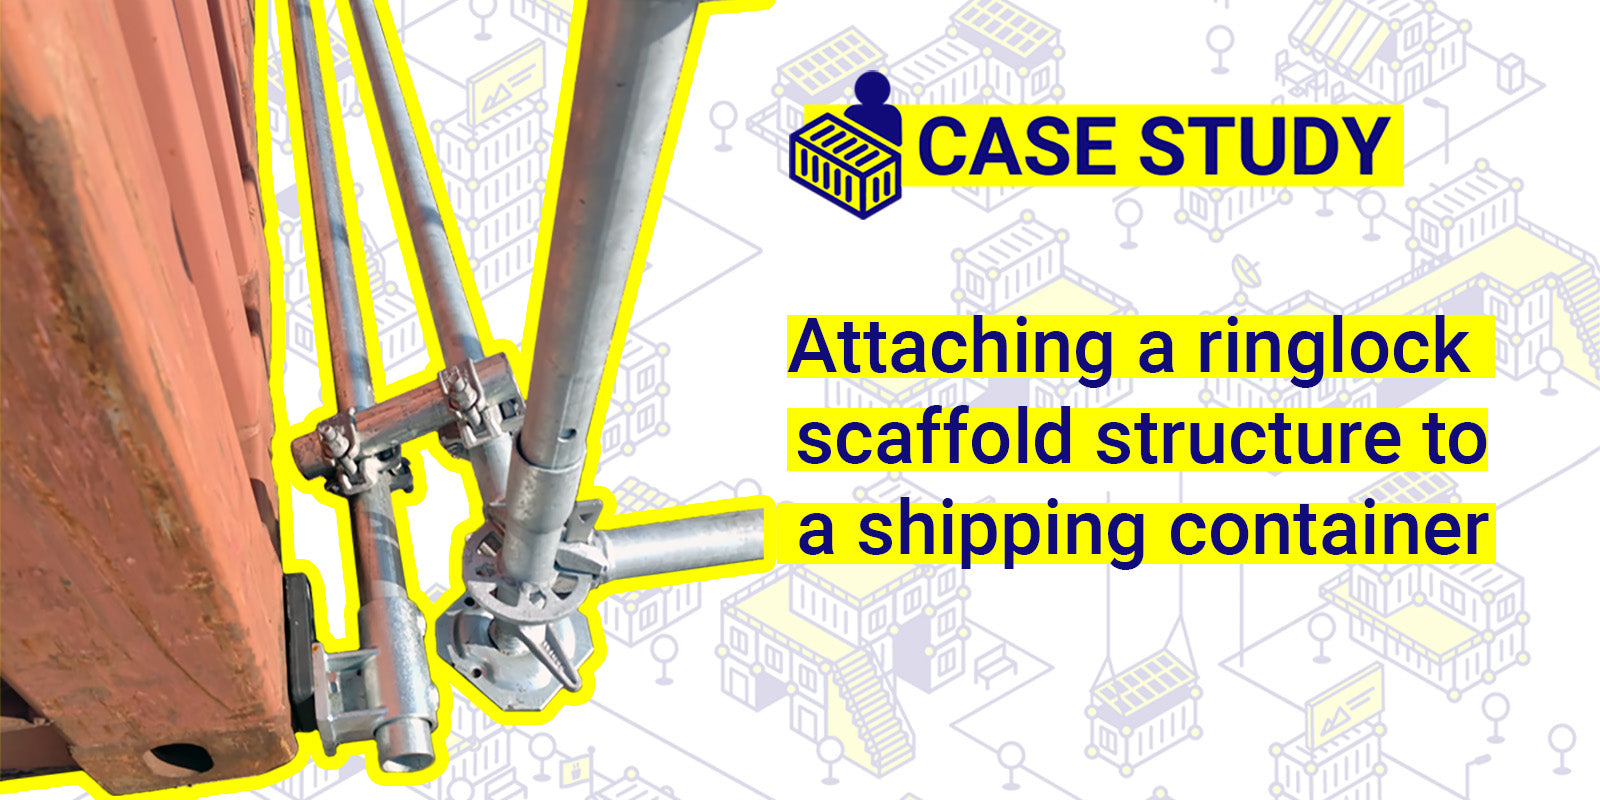 Attaching a ringlock scaffold structure to a shipping container